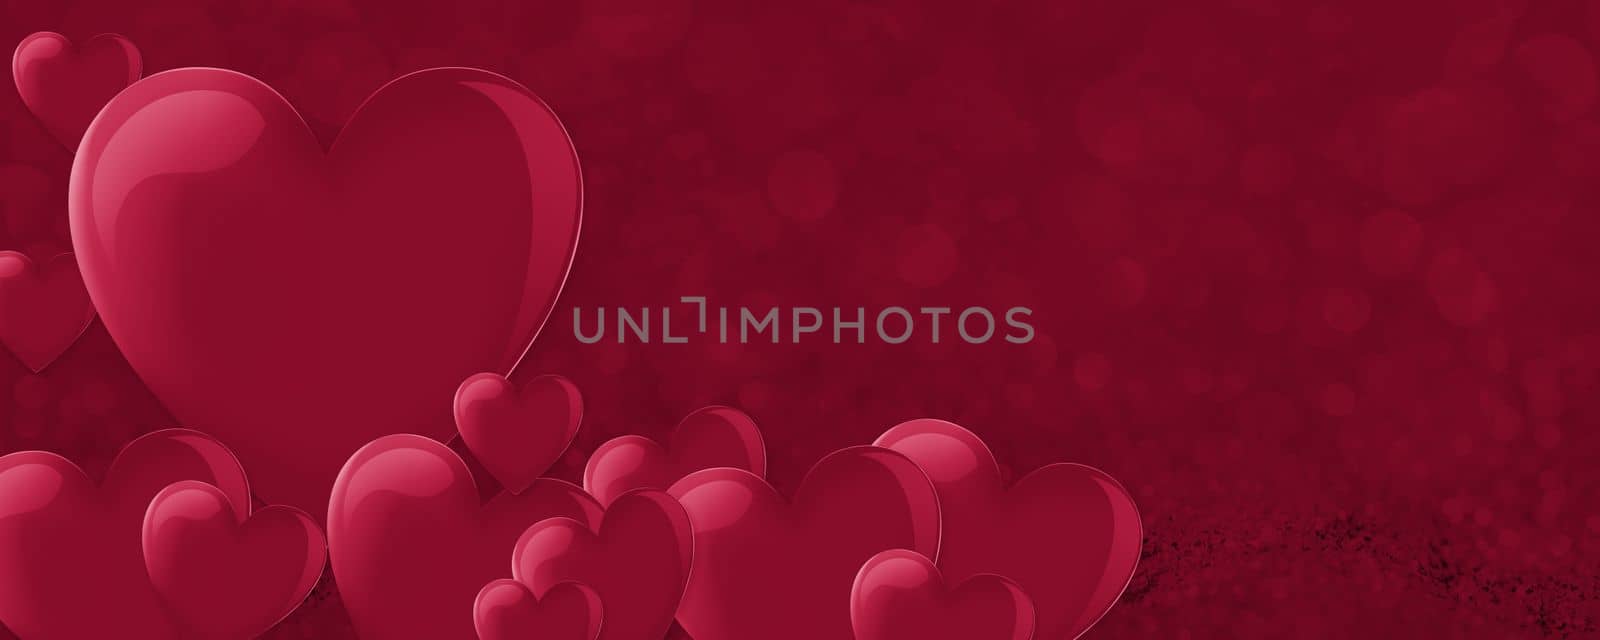 Valentine's Day. Background with heart template. Wallpapers, flyers, invitations, posters, brochures, banners. Valentine's Day.Viva Magenta Background color